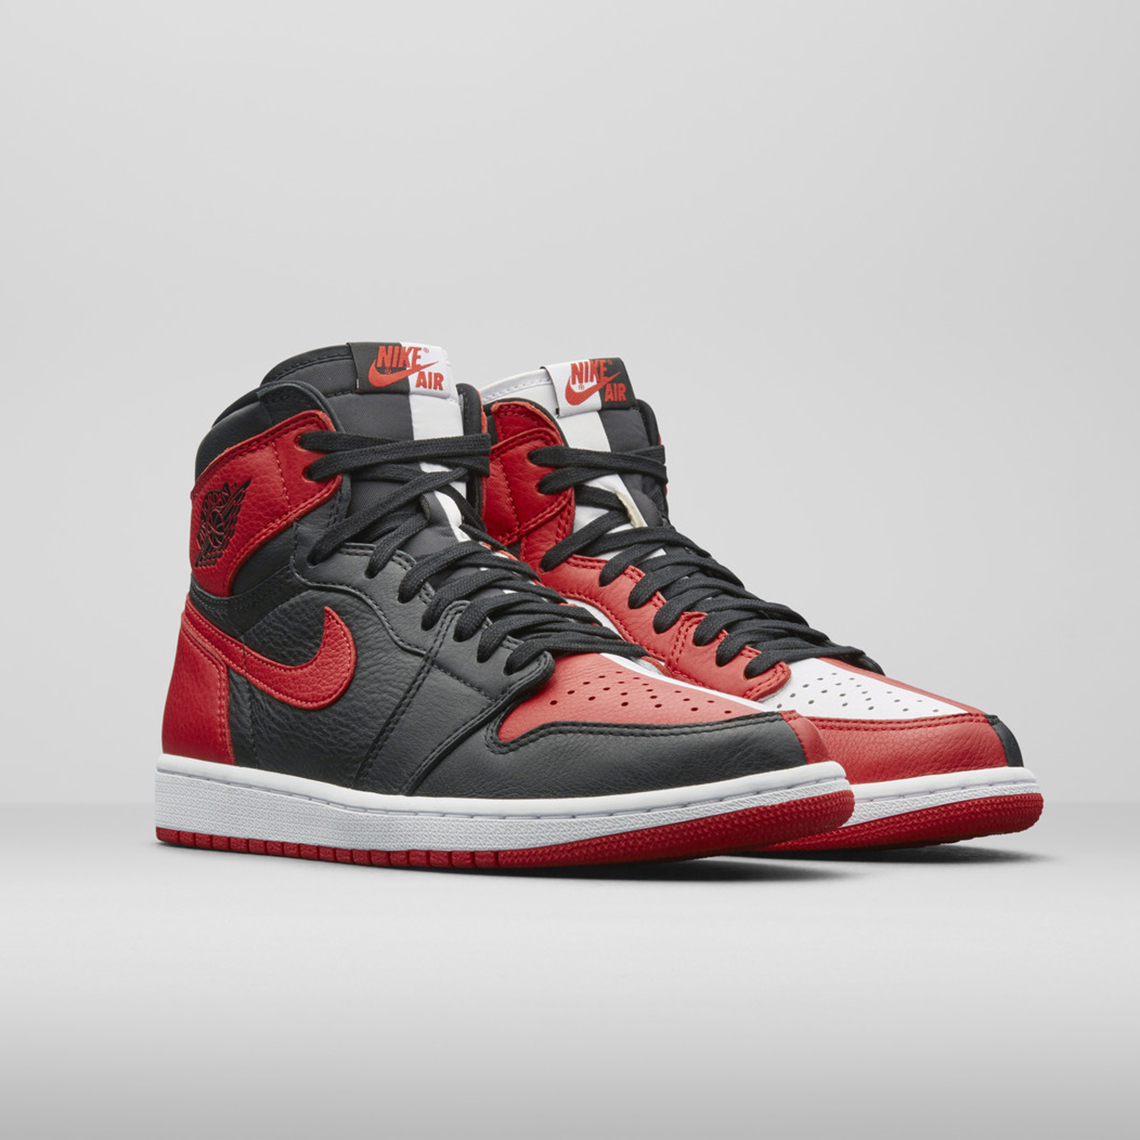 How Much Does The Air Jordan 1 Cost? SneakerNews.com